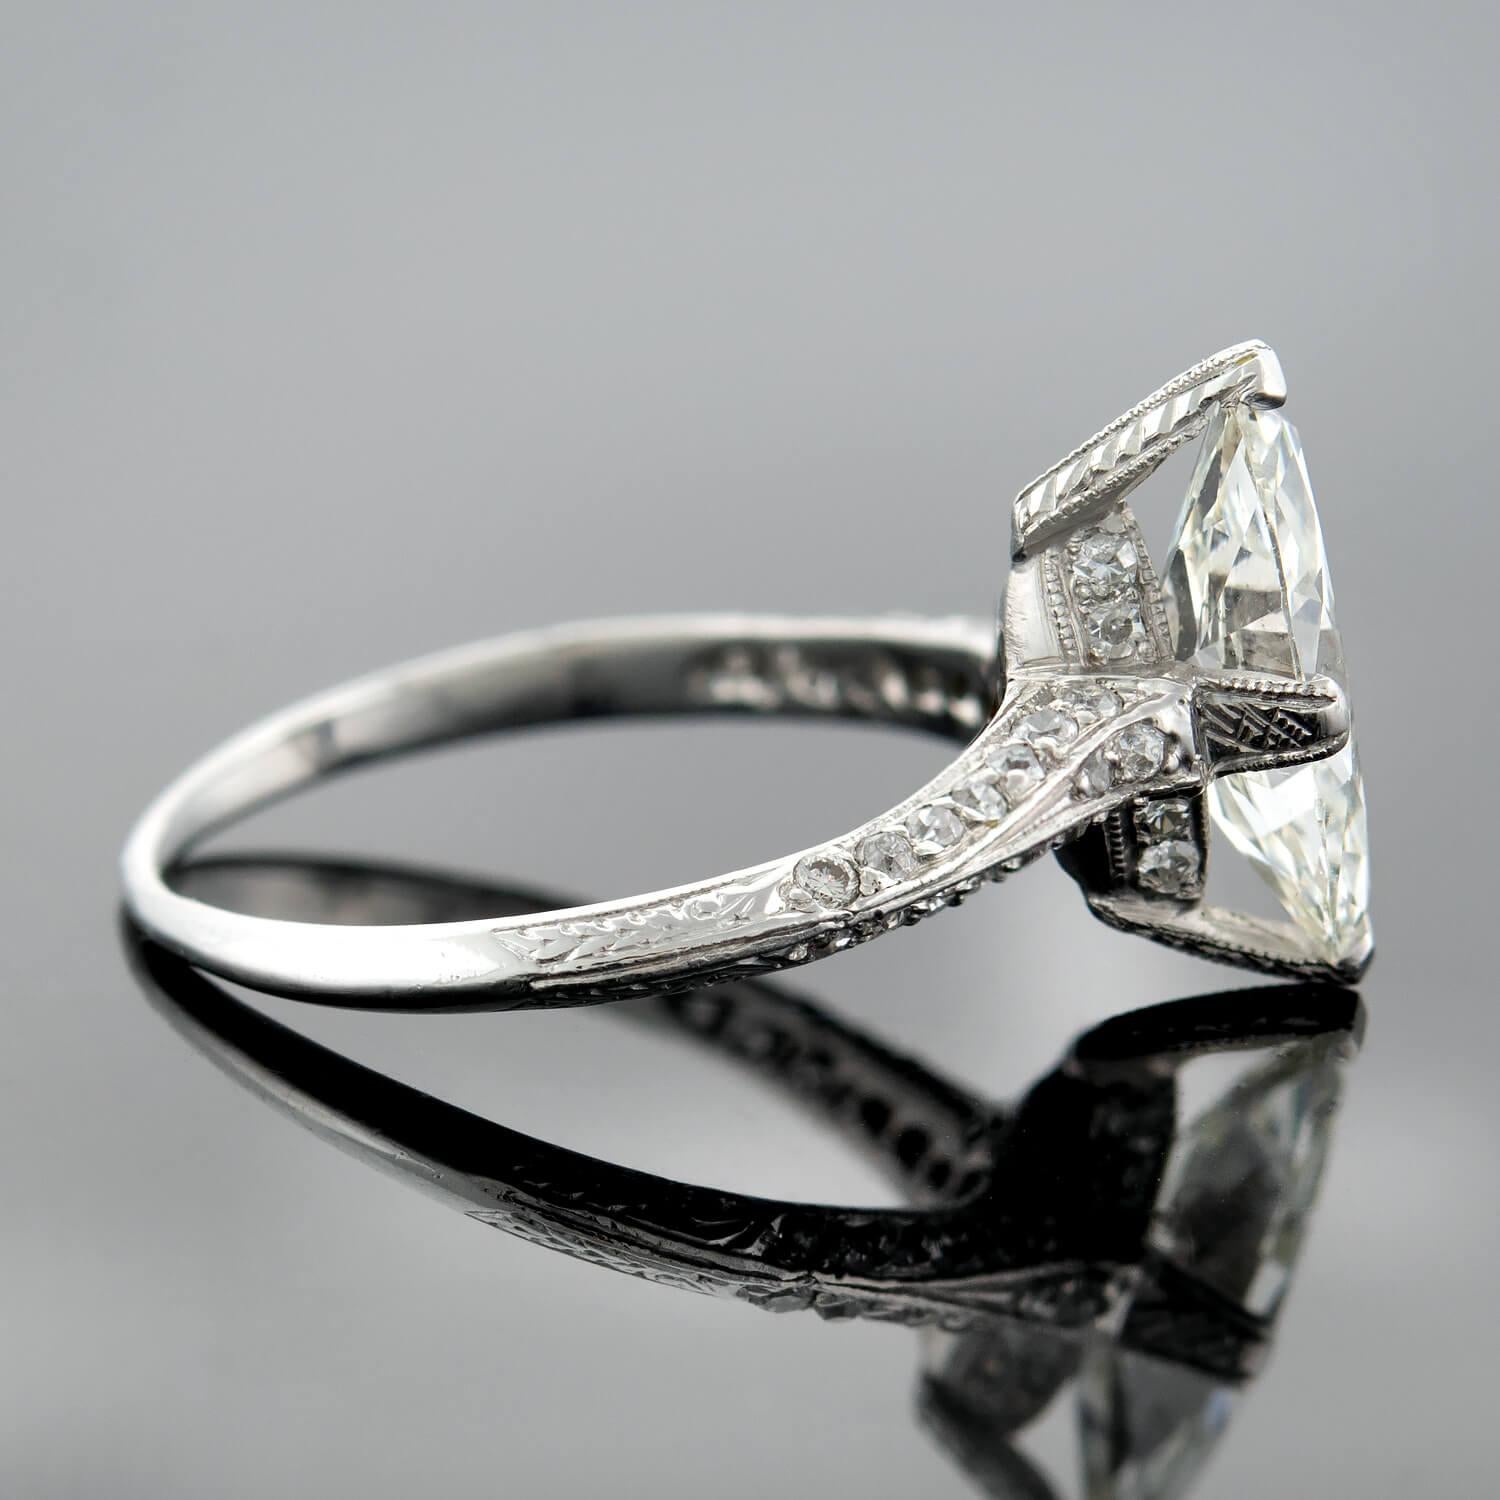 A gorgeous Art Deco diamond engagement ring from the 1920s era! Crafted in platinum, this lovely piece has a stunning Marquise Cut diamond that is prong set prominently at the center. The diamond, which rests in a beautifully etched 4 prong setting,